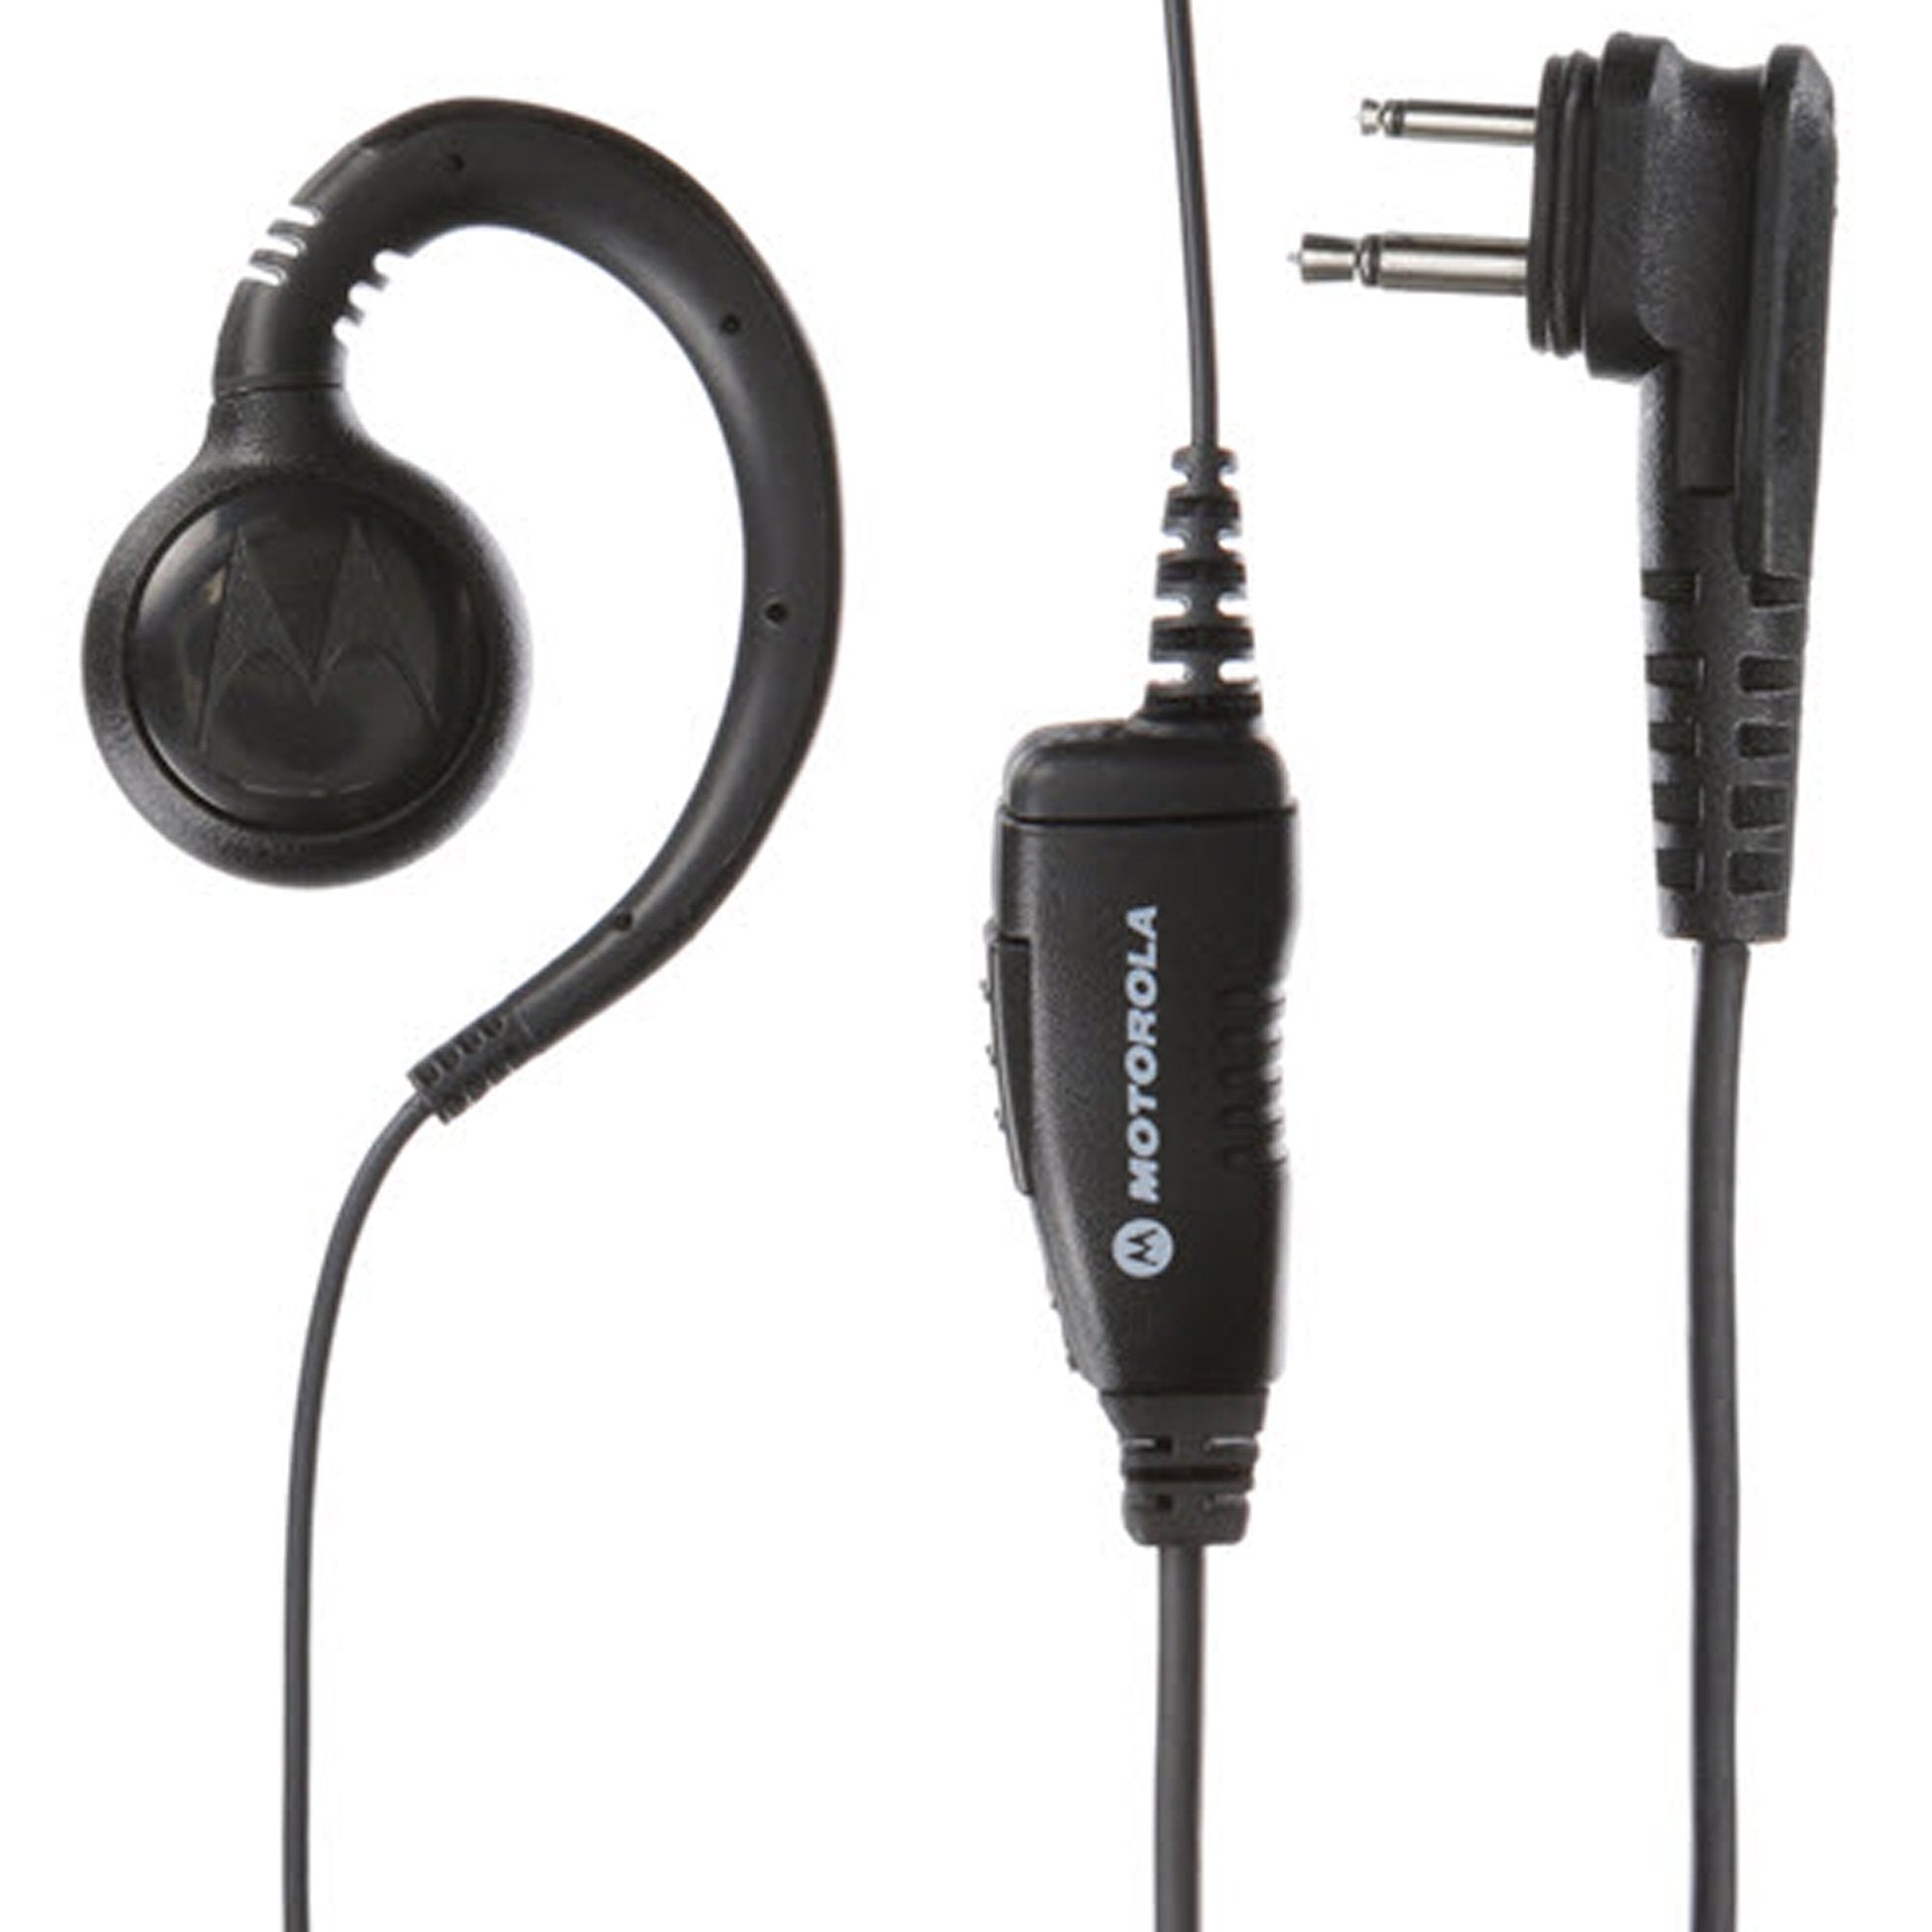 Motorola DLR1060 Pack Bundle with Multi-Unit Charger and Headsets|  TwoWayRadioGearCanada